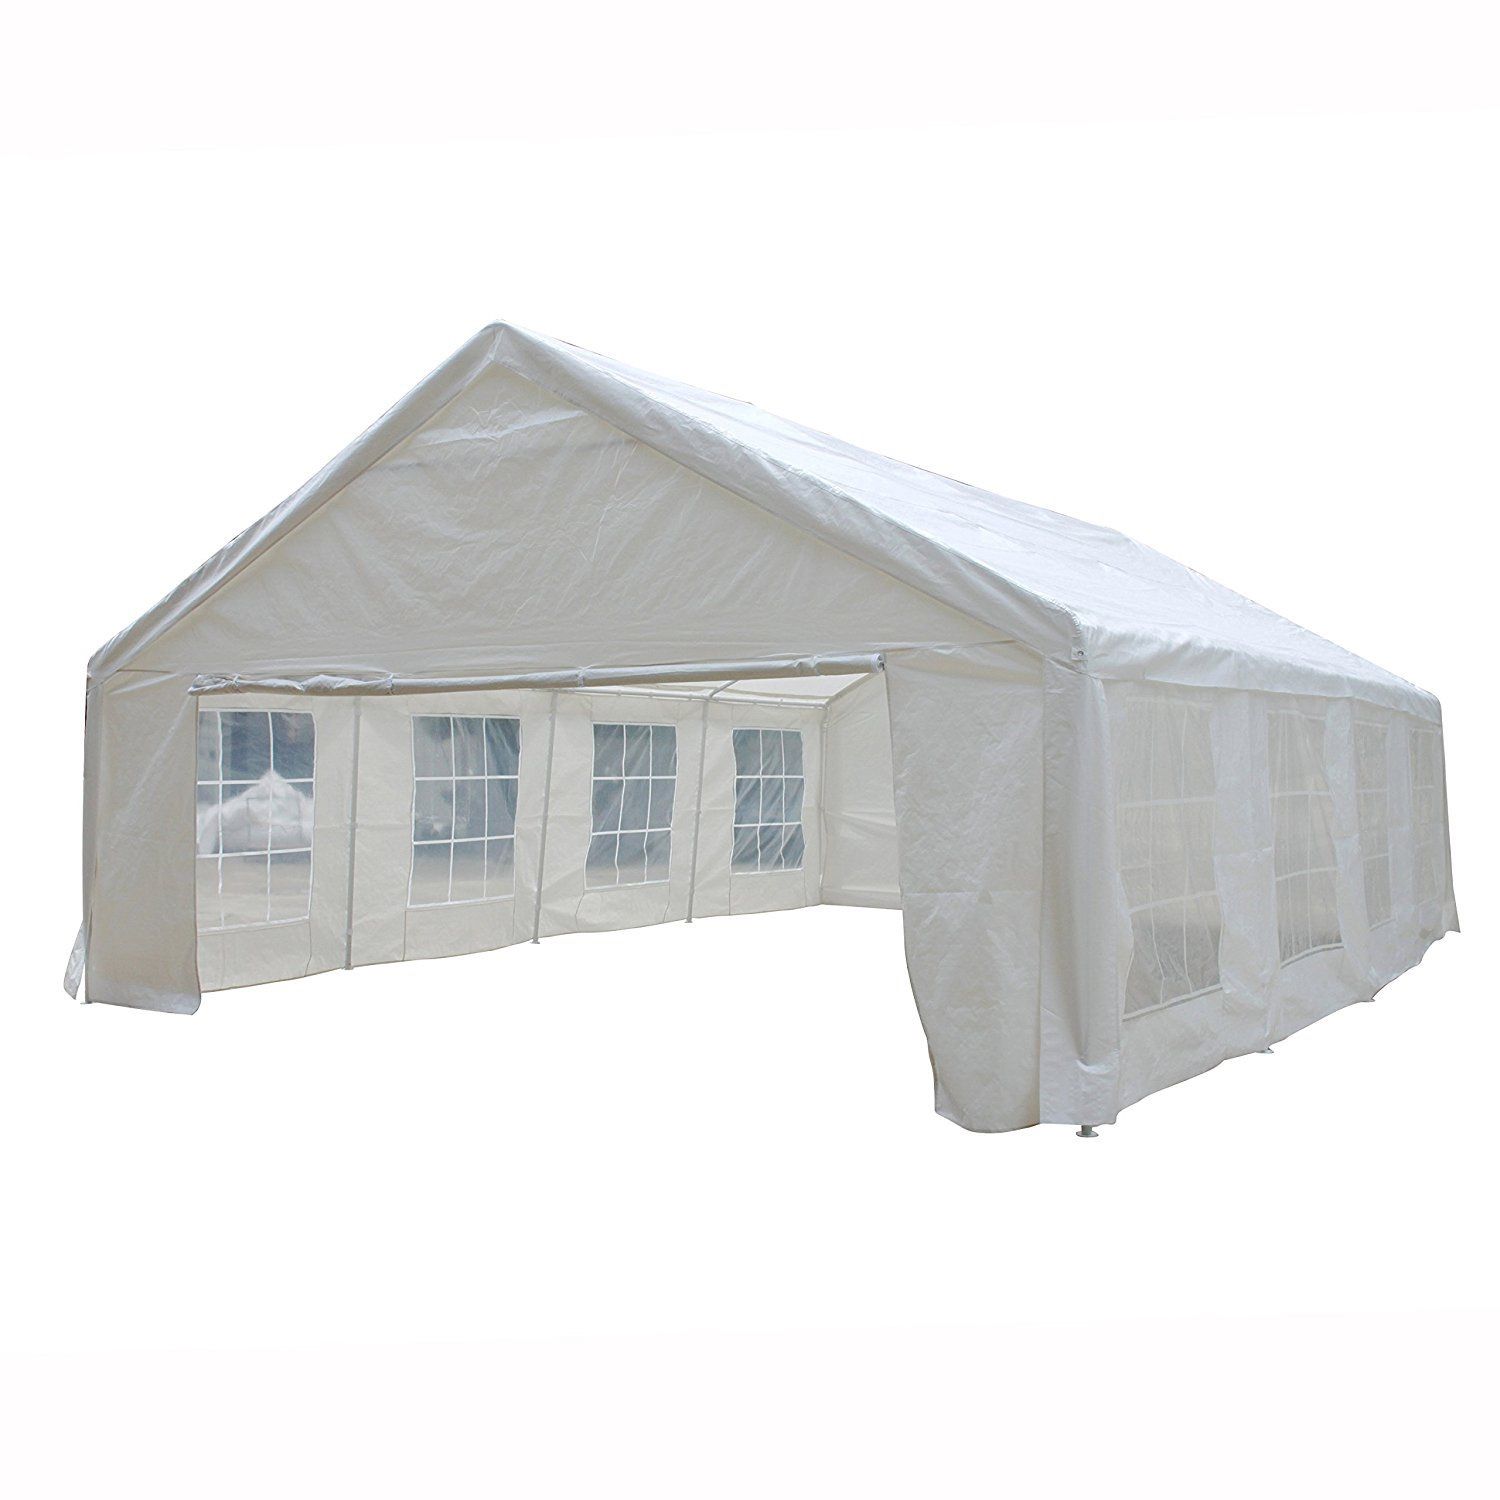 20 x 30 Canopy Tent with Windows